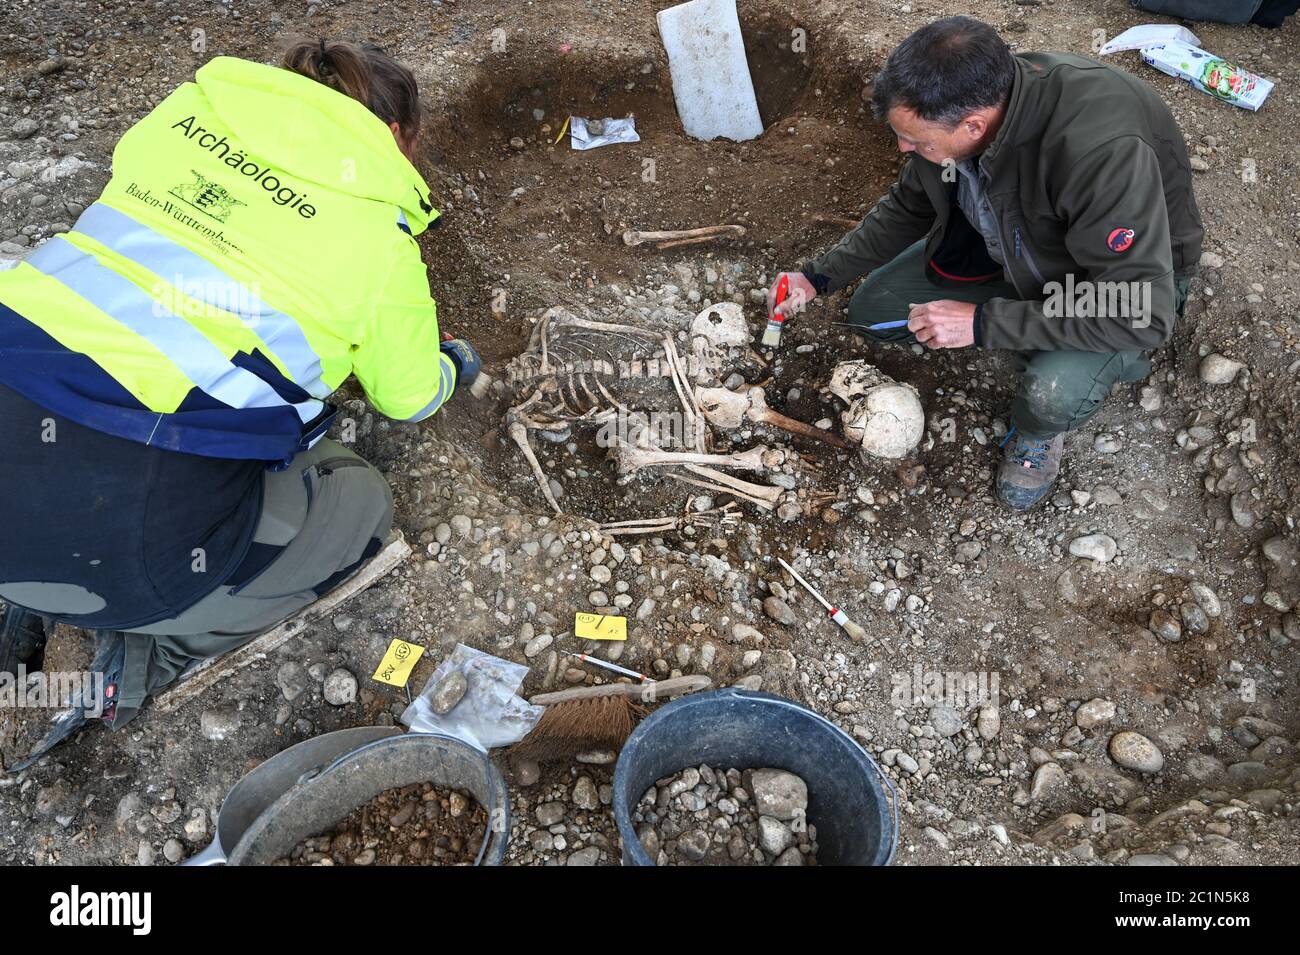 Allensbach, Germany. 04th June, 2020. District archaeologist and excavation director Jürgen Hald (r) and excavation technician Rebecca Letzing excavate parts of skeletons at the historical execution site not far from the Gnadensee (part of Lake Constance). Archaeologists have found the remains of a gallows, several skeletons and cremation pits there. (to dpa: 'Death on the gallows - archaeologists discover execution site at Lake Constance') Credit: Felix Kästle/dpa/Alamy Live News Stock Photo